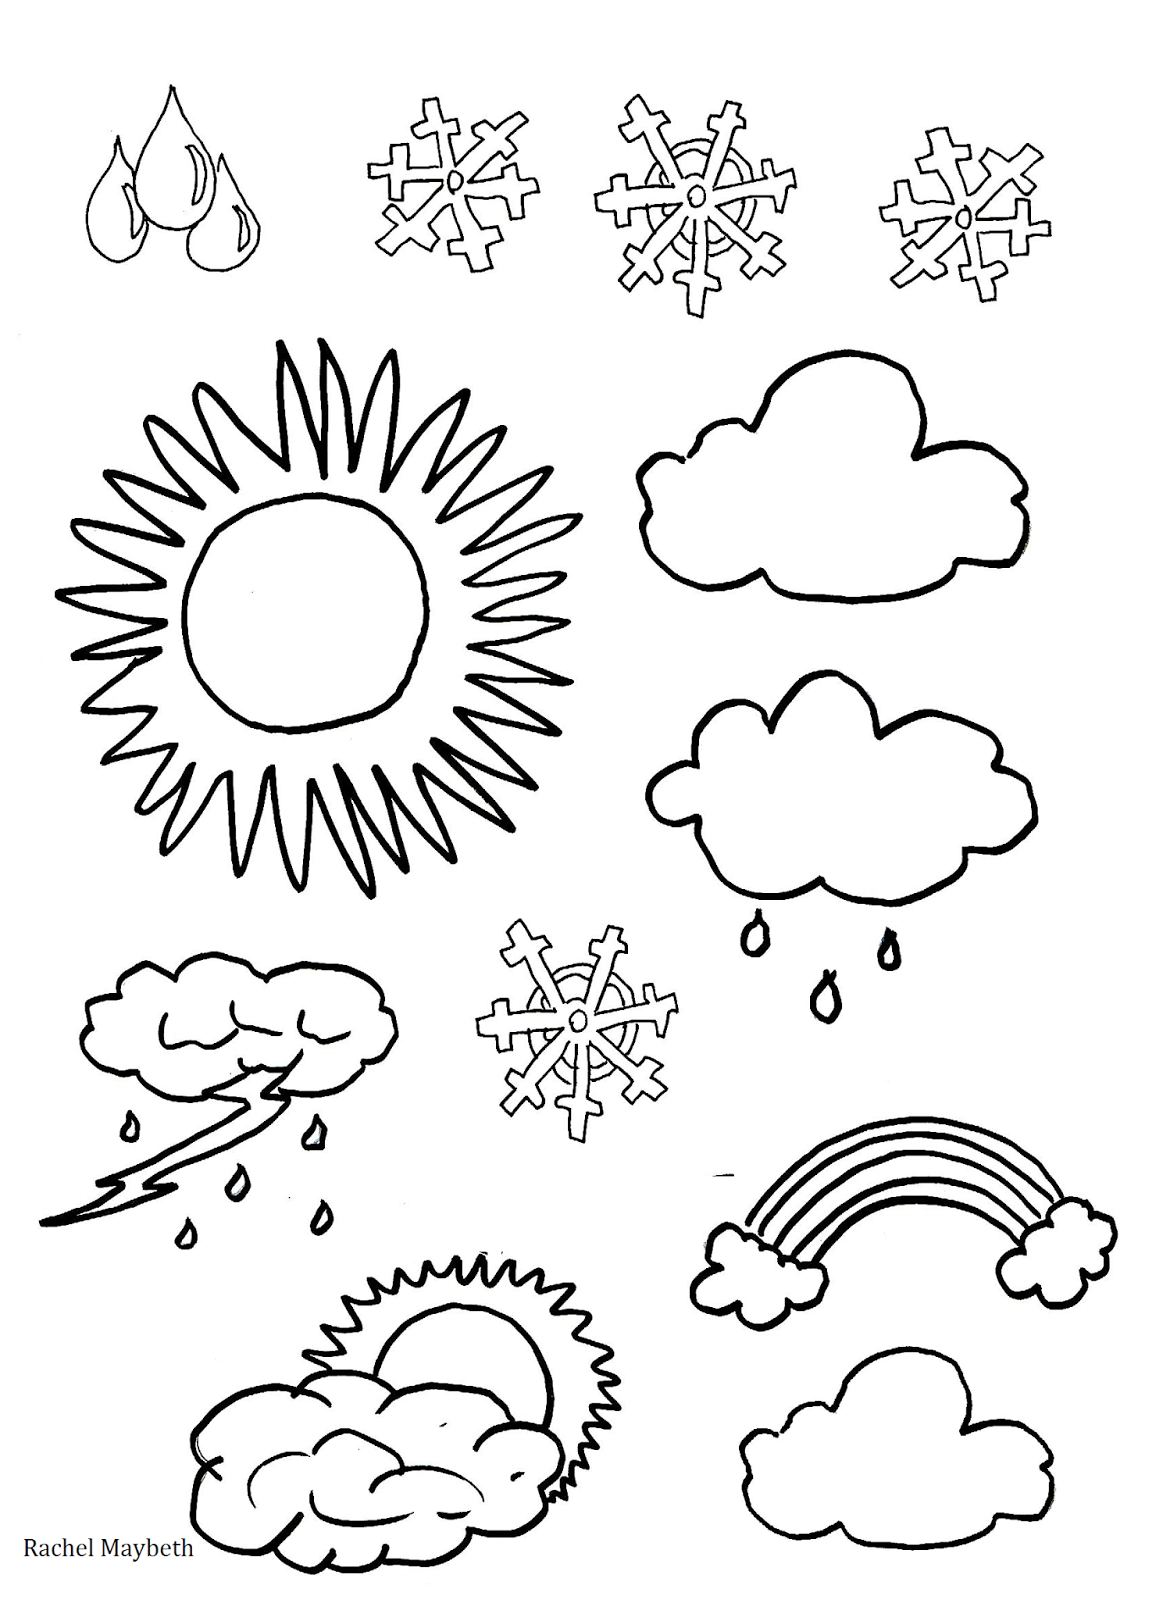 Download Rachel Maybeth : Free Weather Clipart /Coloring pages